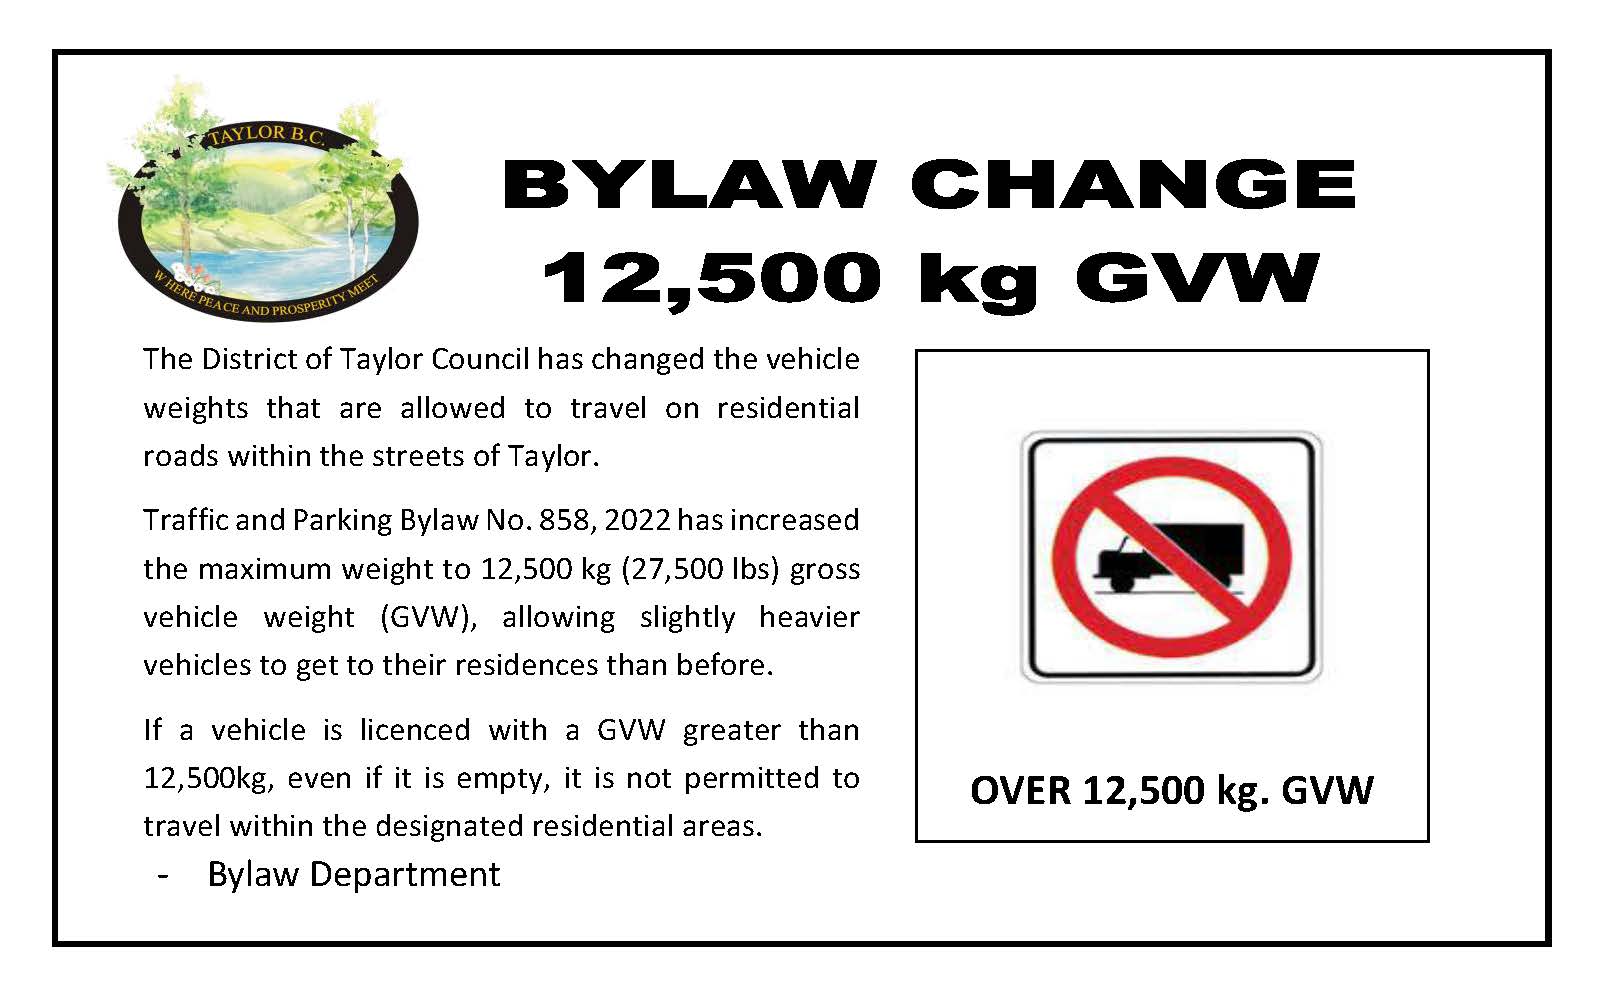 Please be advised of the following Traffic and Parking Bylaw changes